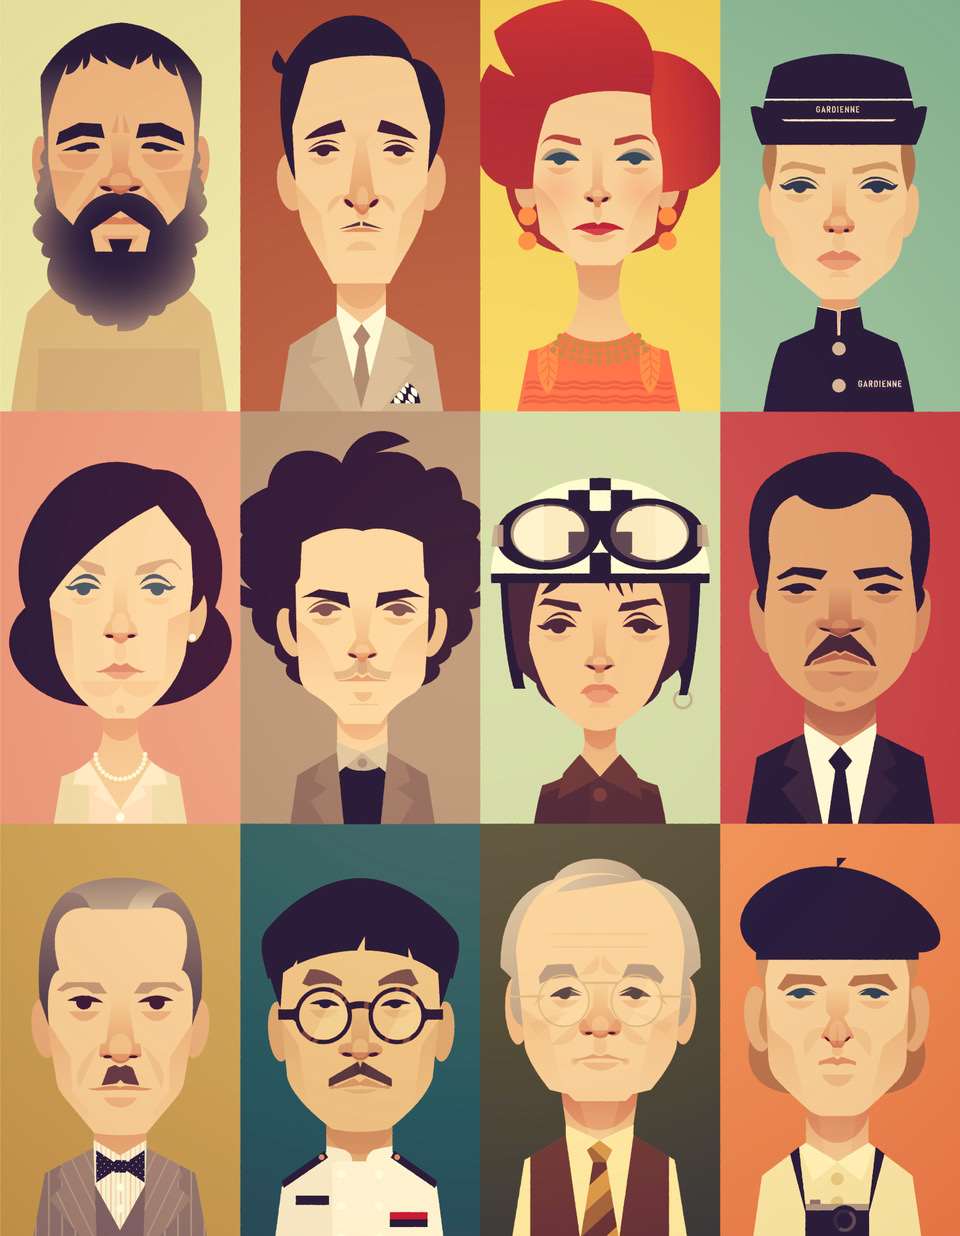 Stanley Chow, Vector, graphic style illustrations of characters from French Dispatch.